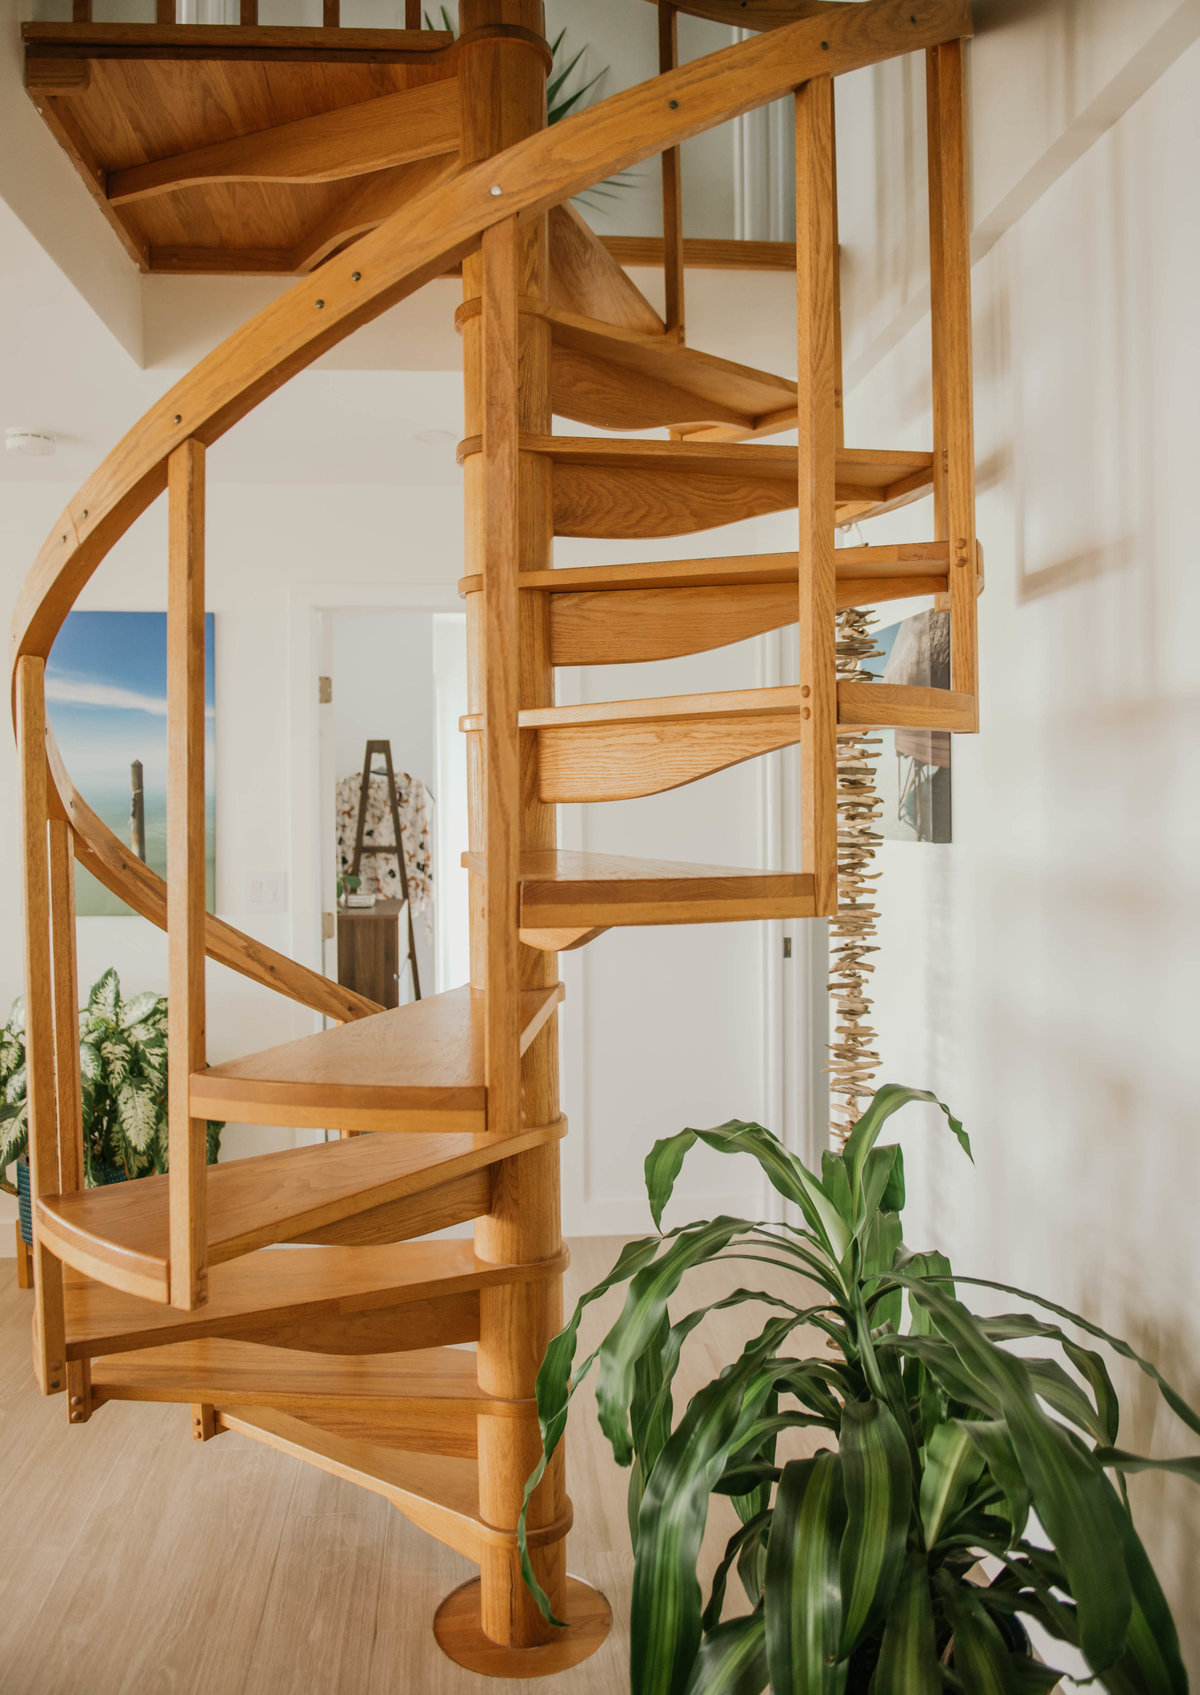 Oak Spiral Staircase original to home. SOL Y MAR INTERIORS